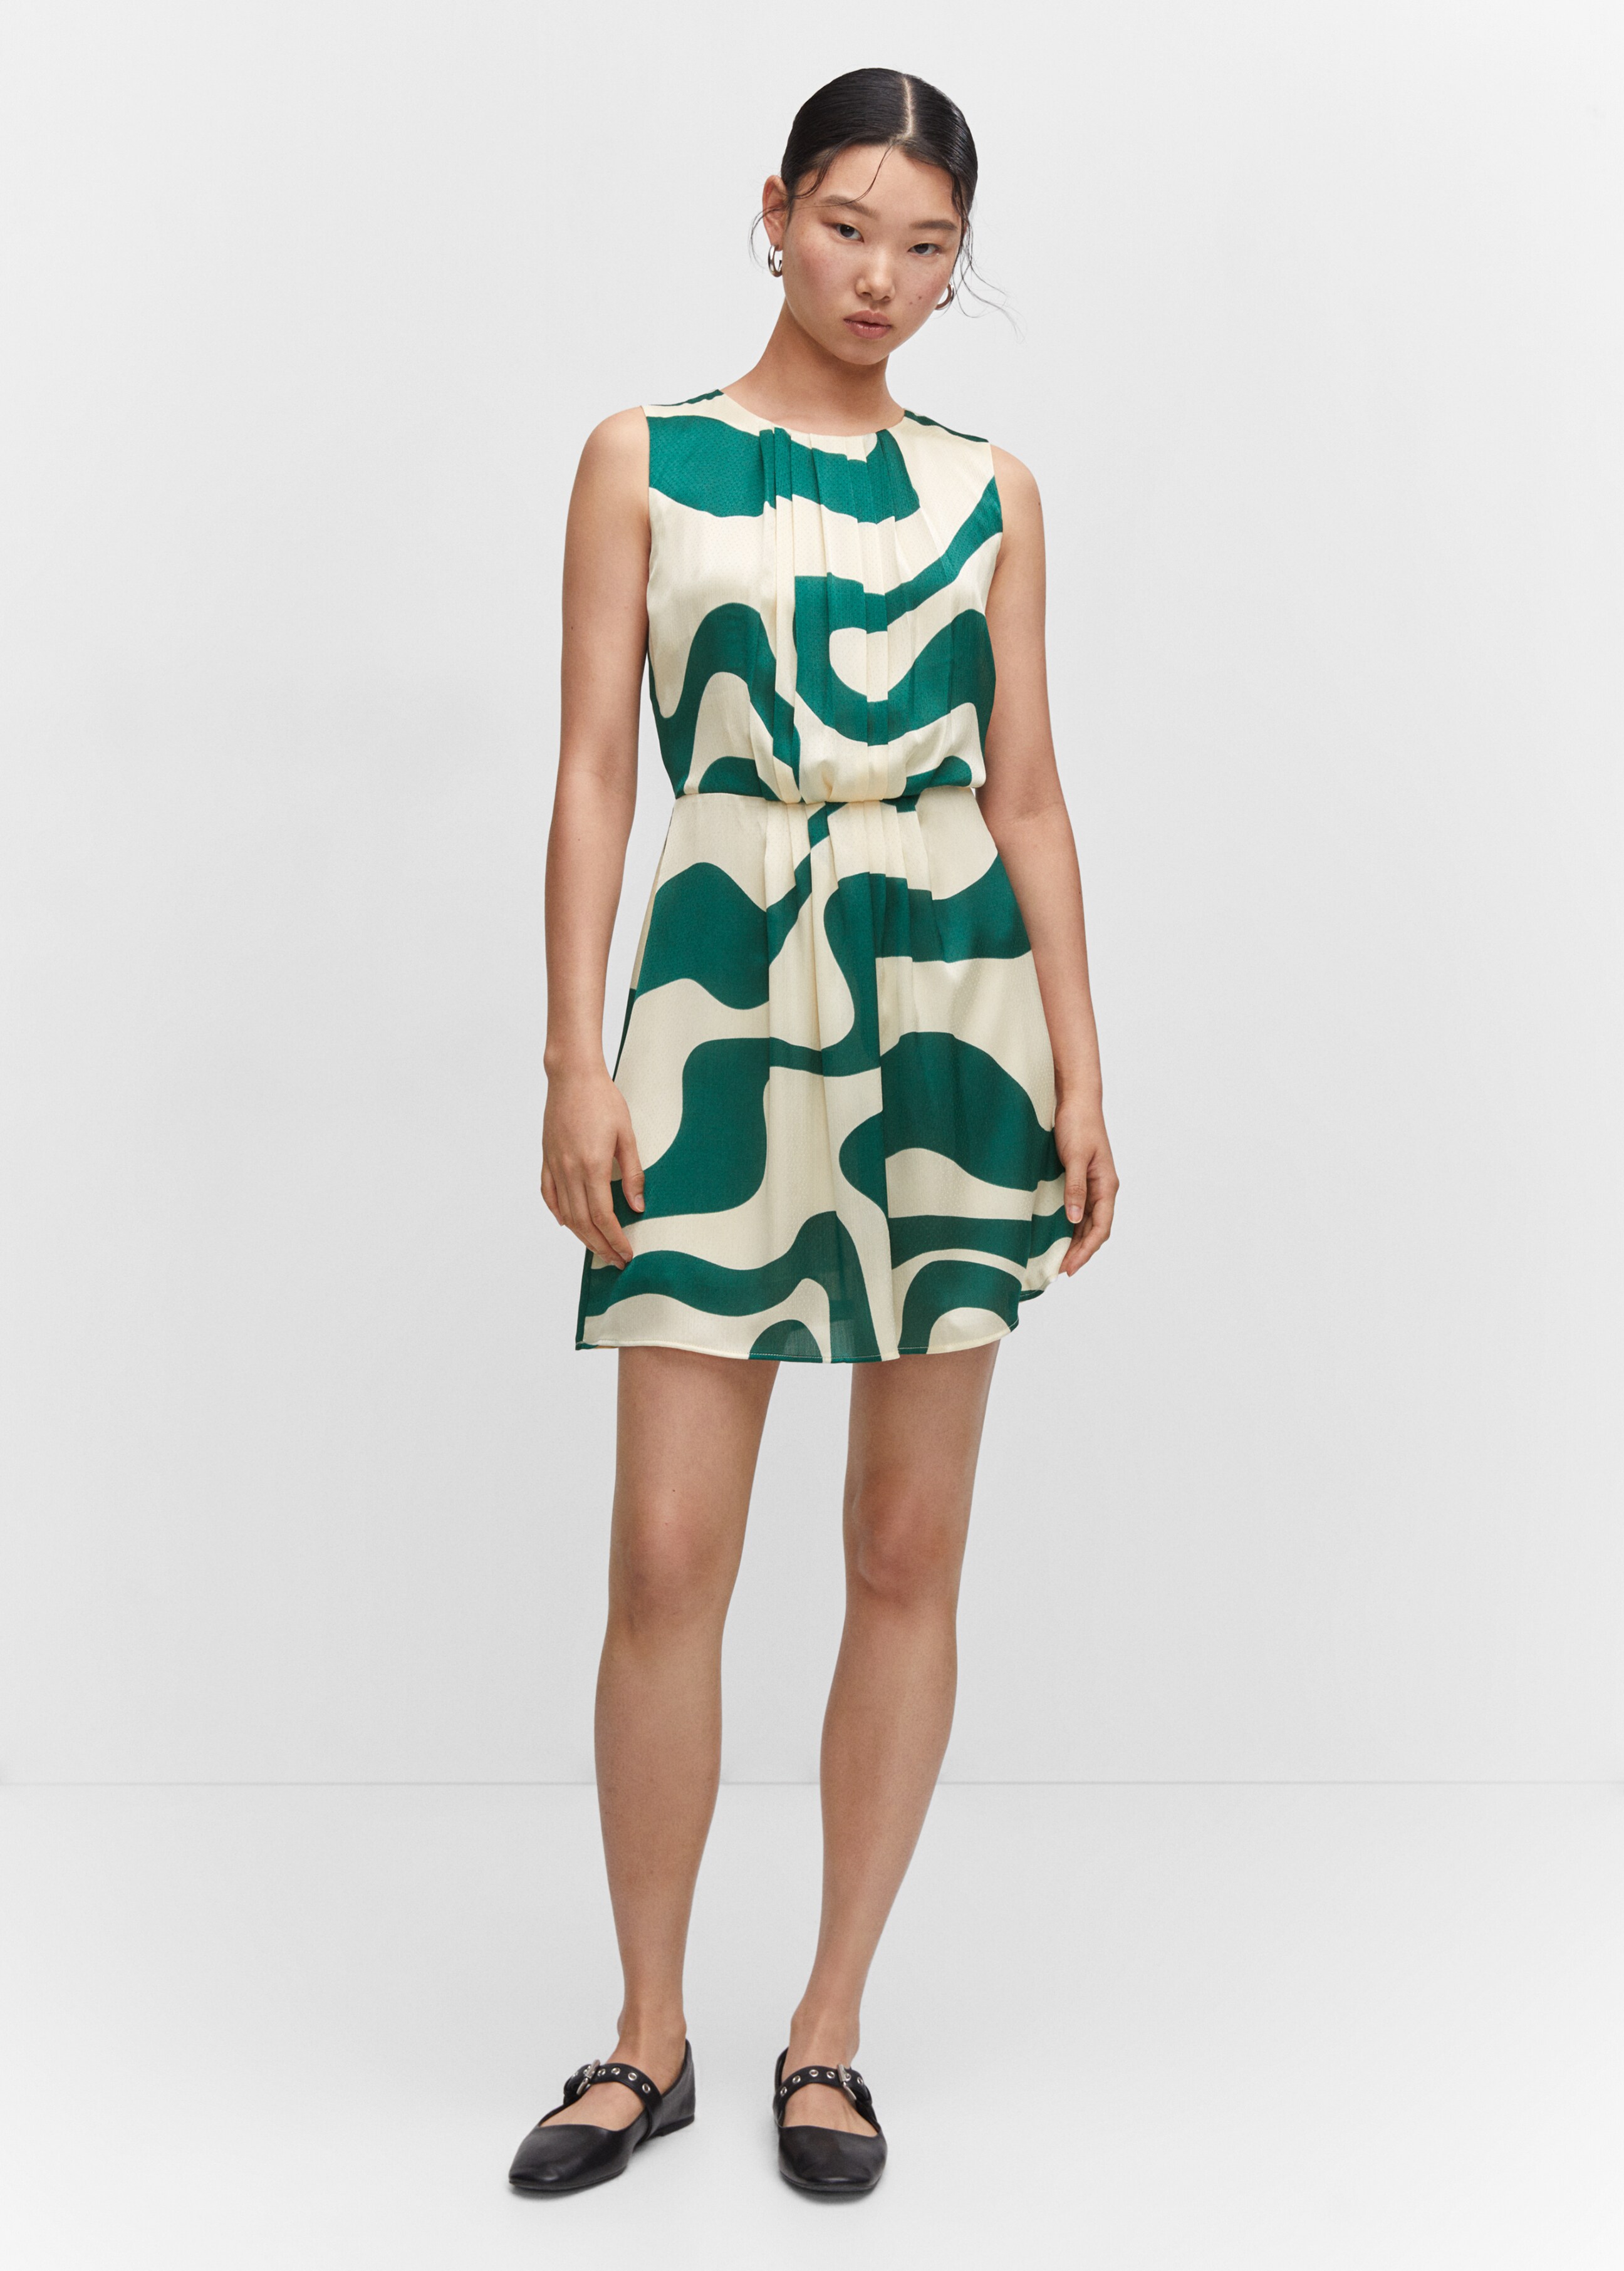 Printed dress with pleated details - General plane